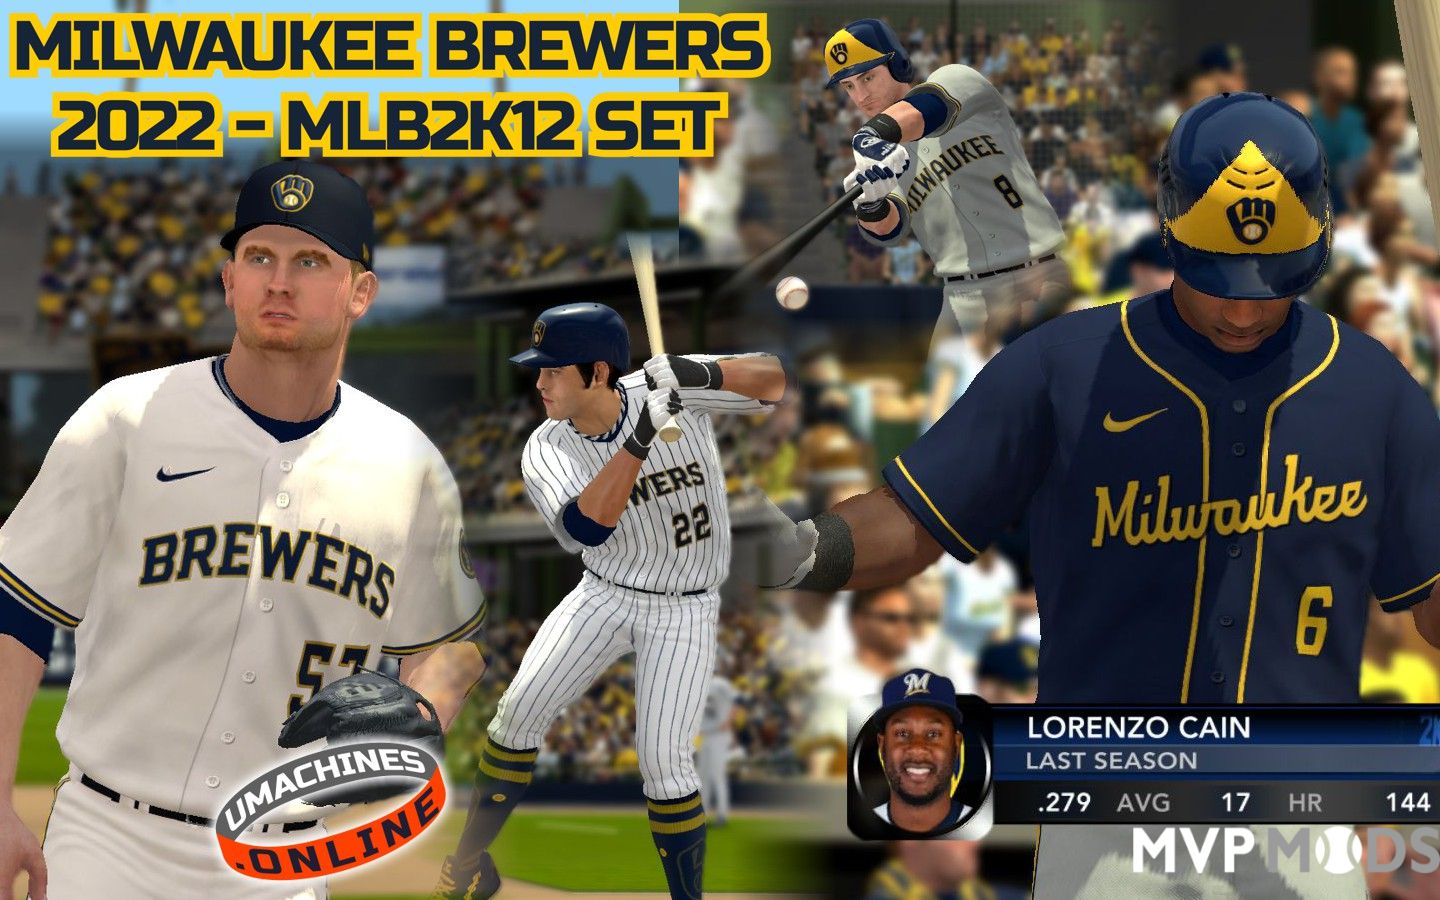 brewers new uniforms 2022